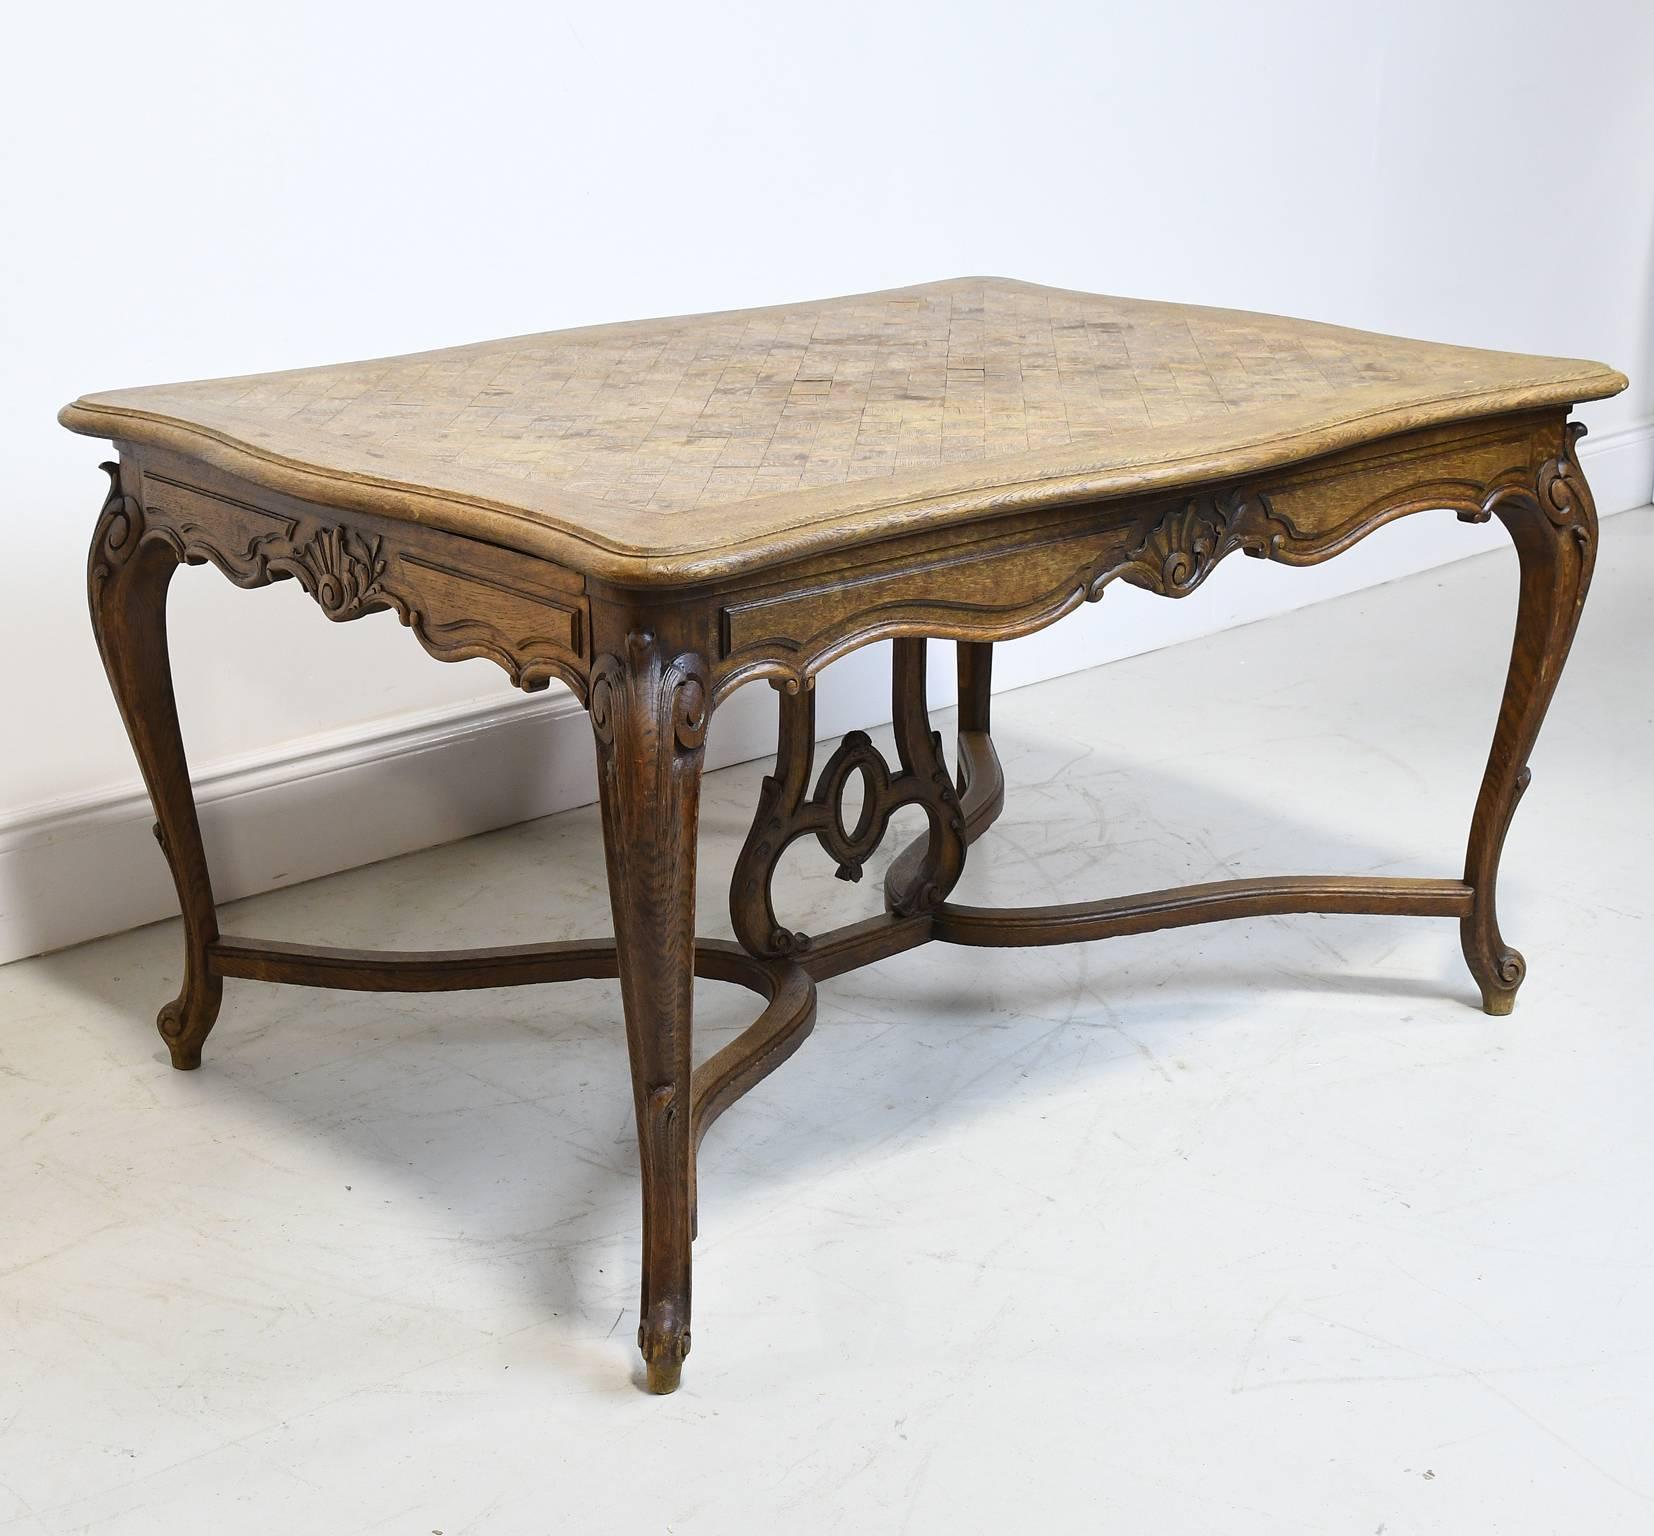 This especially beautiful French Provincial dining table in the style of Louis XV is in oak with an undulating parquetry-inlaid top with drawer supports at either end that pull-out for two leaves (that would need to be made) that extend the table's